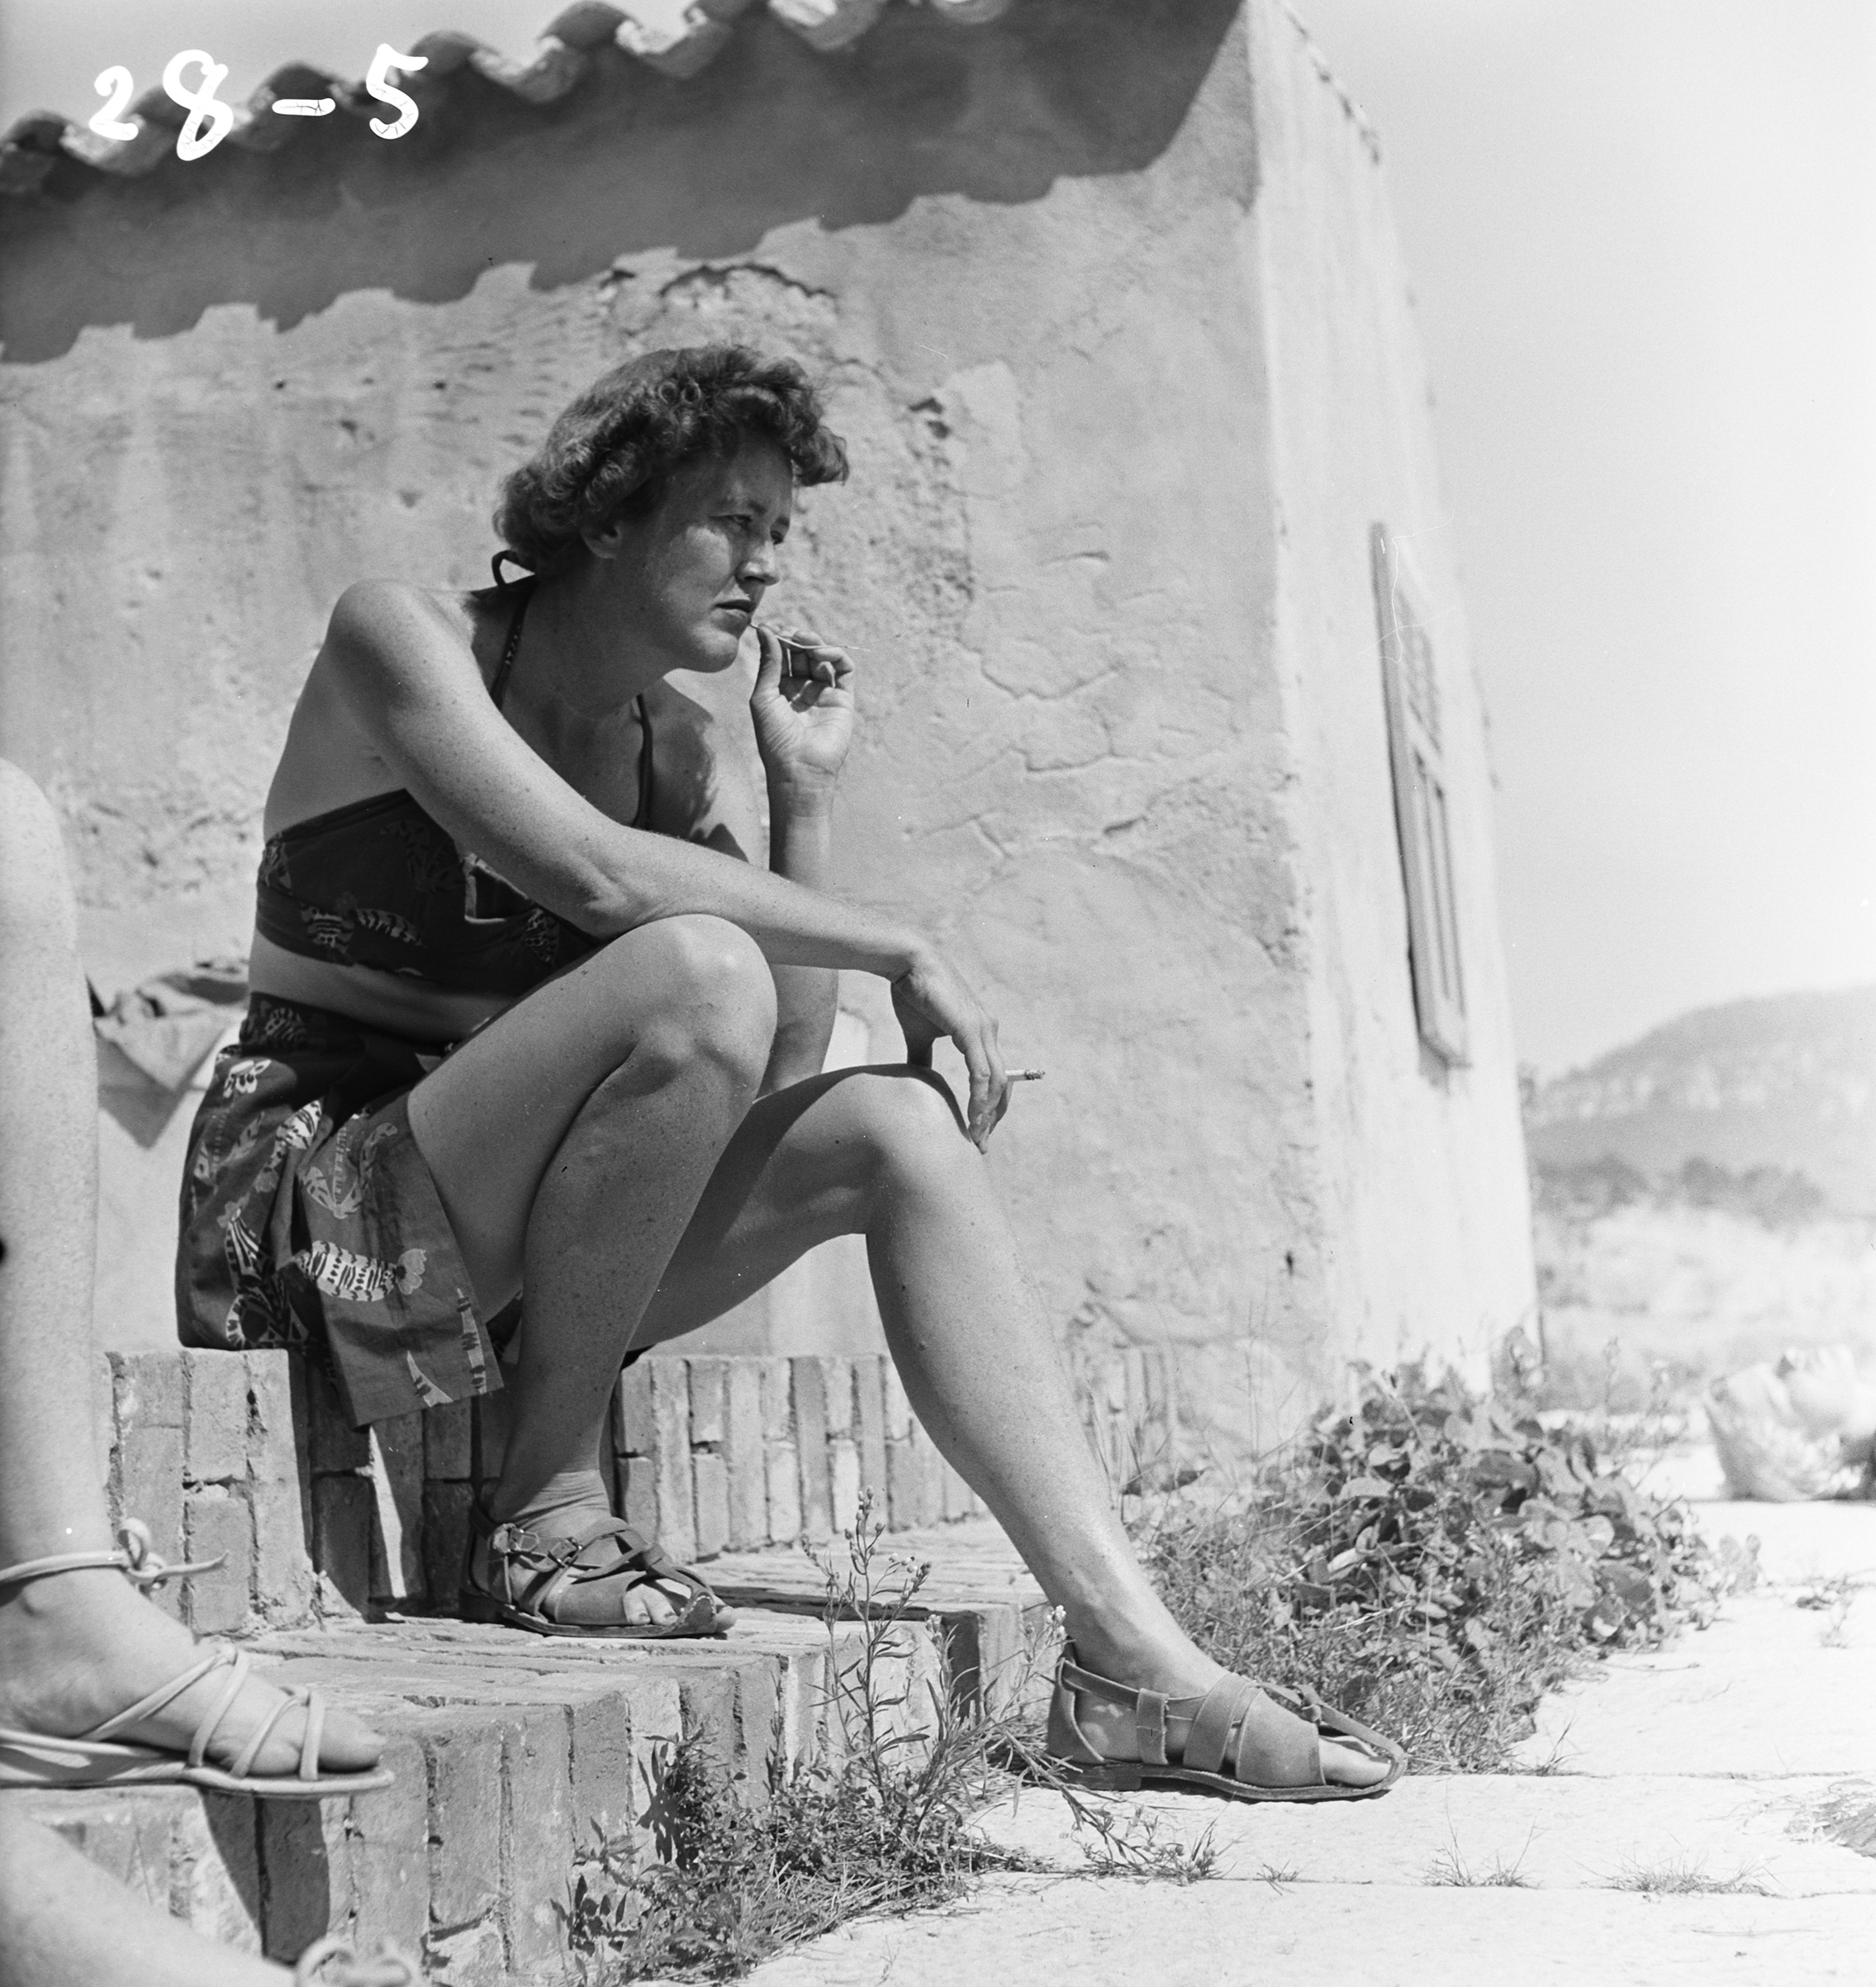 Julia Child by her husband Paul Child in France in the 1950s.